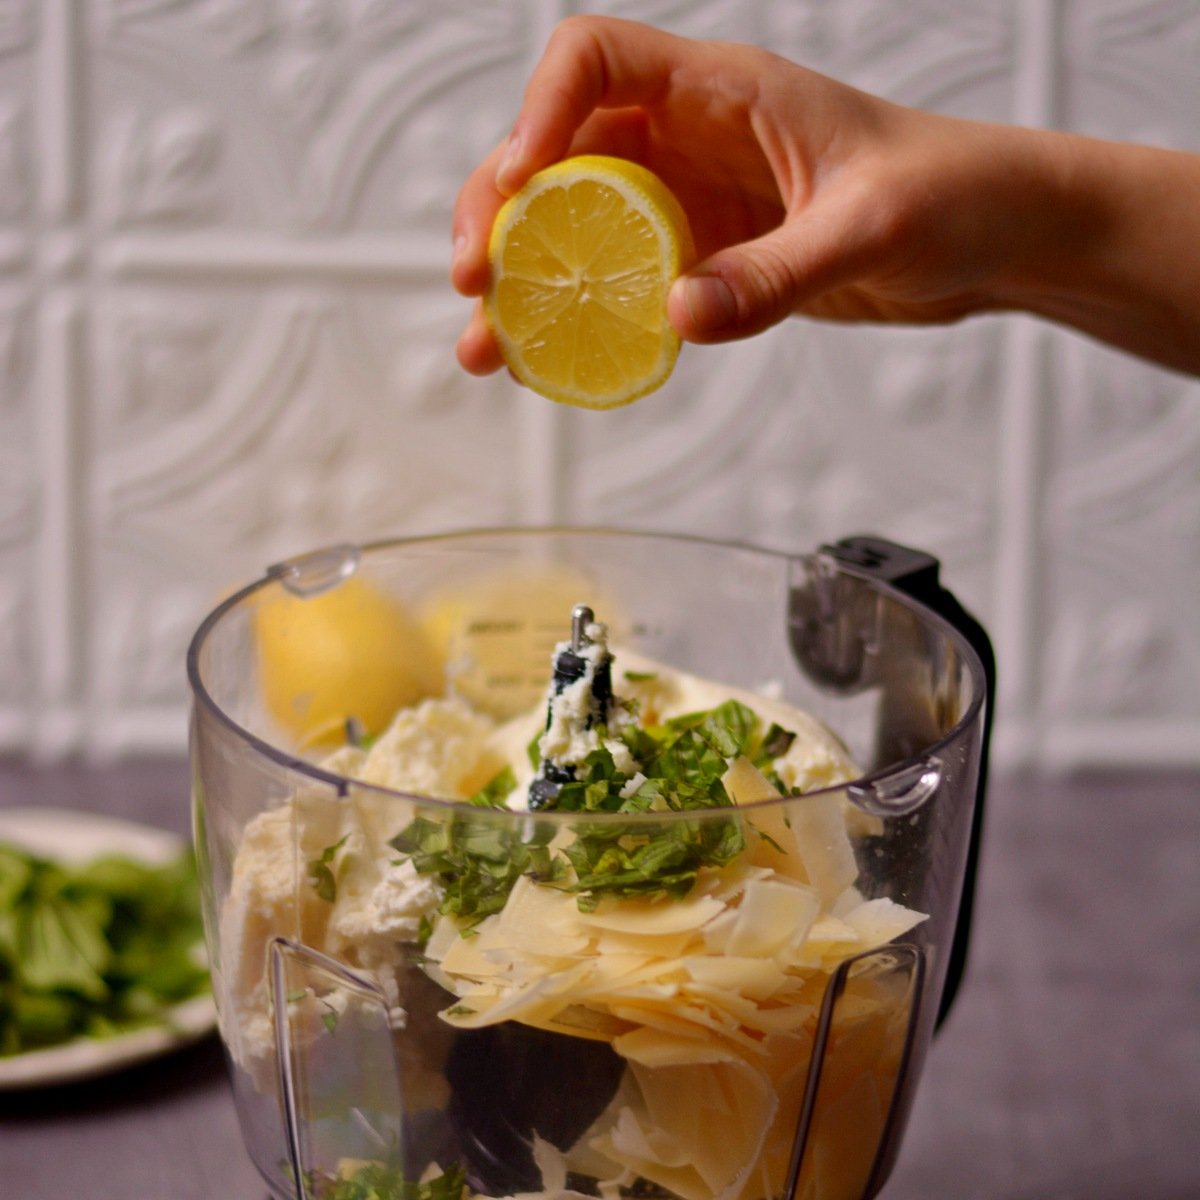 A hand squeezing a lemon over other ingredients inside a blender.